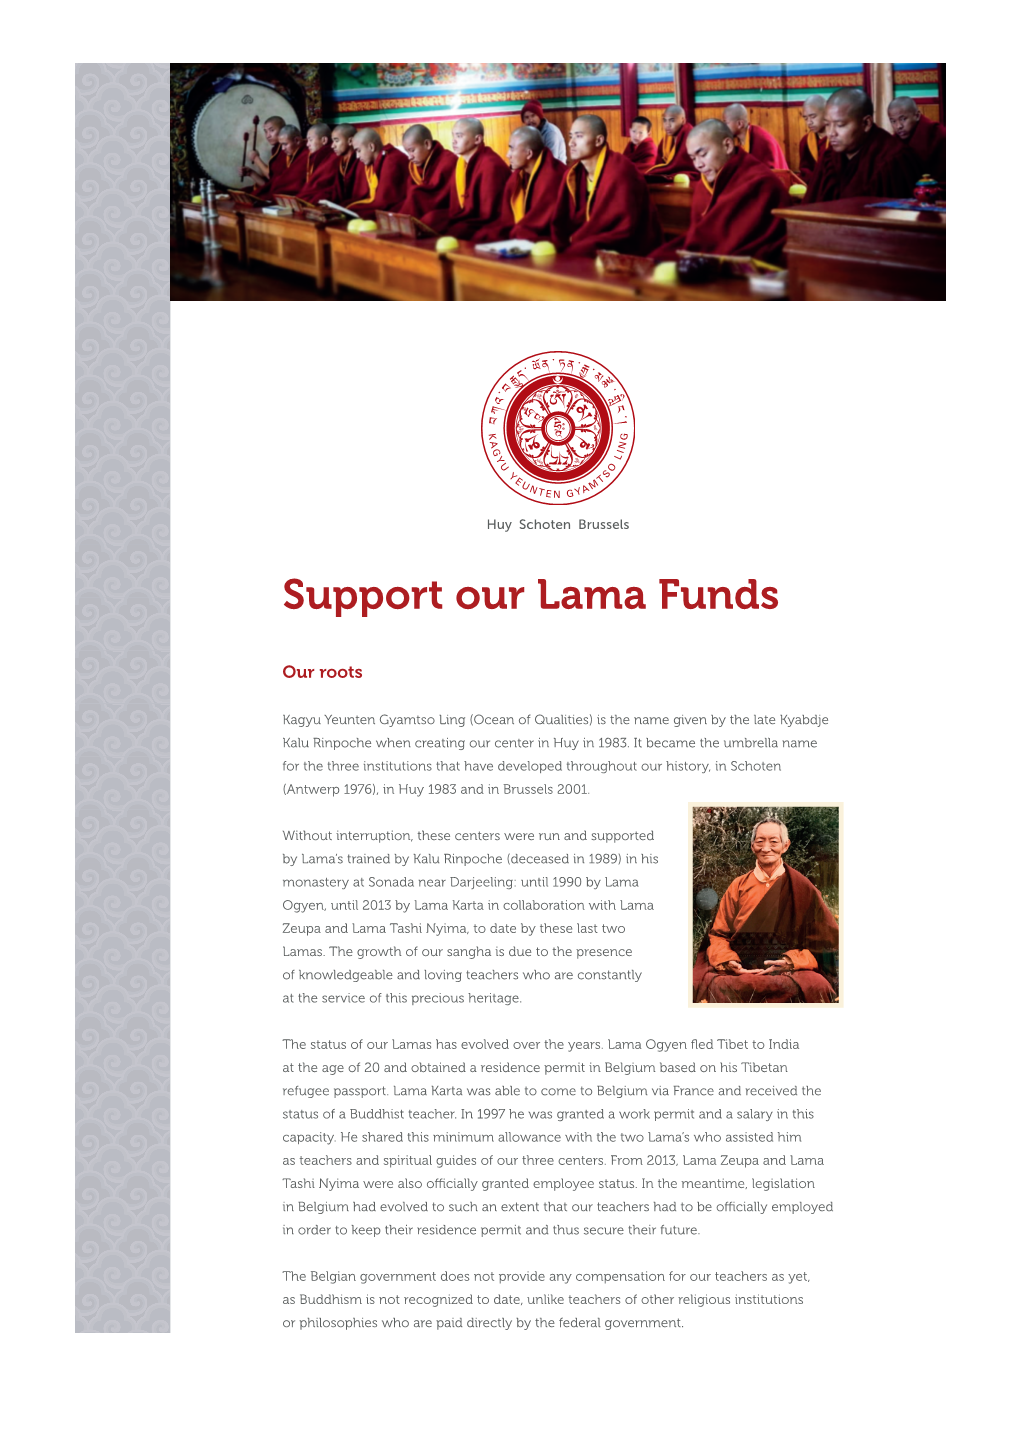 Support Our Lama Funds